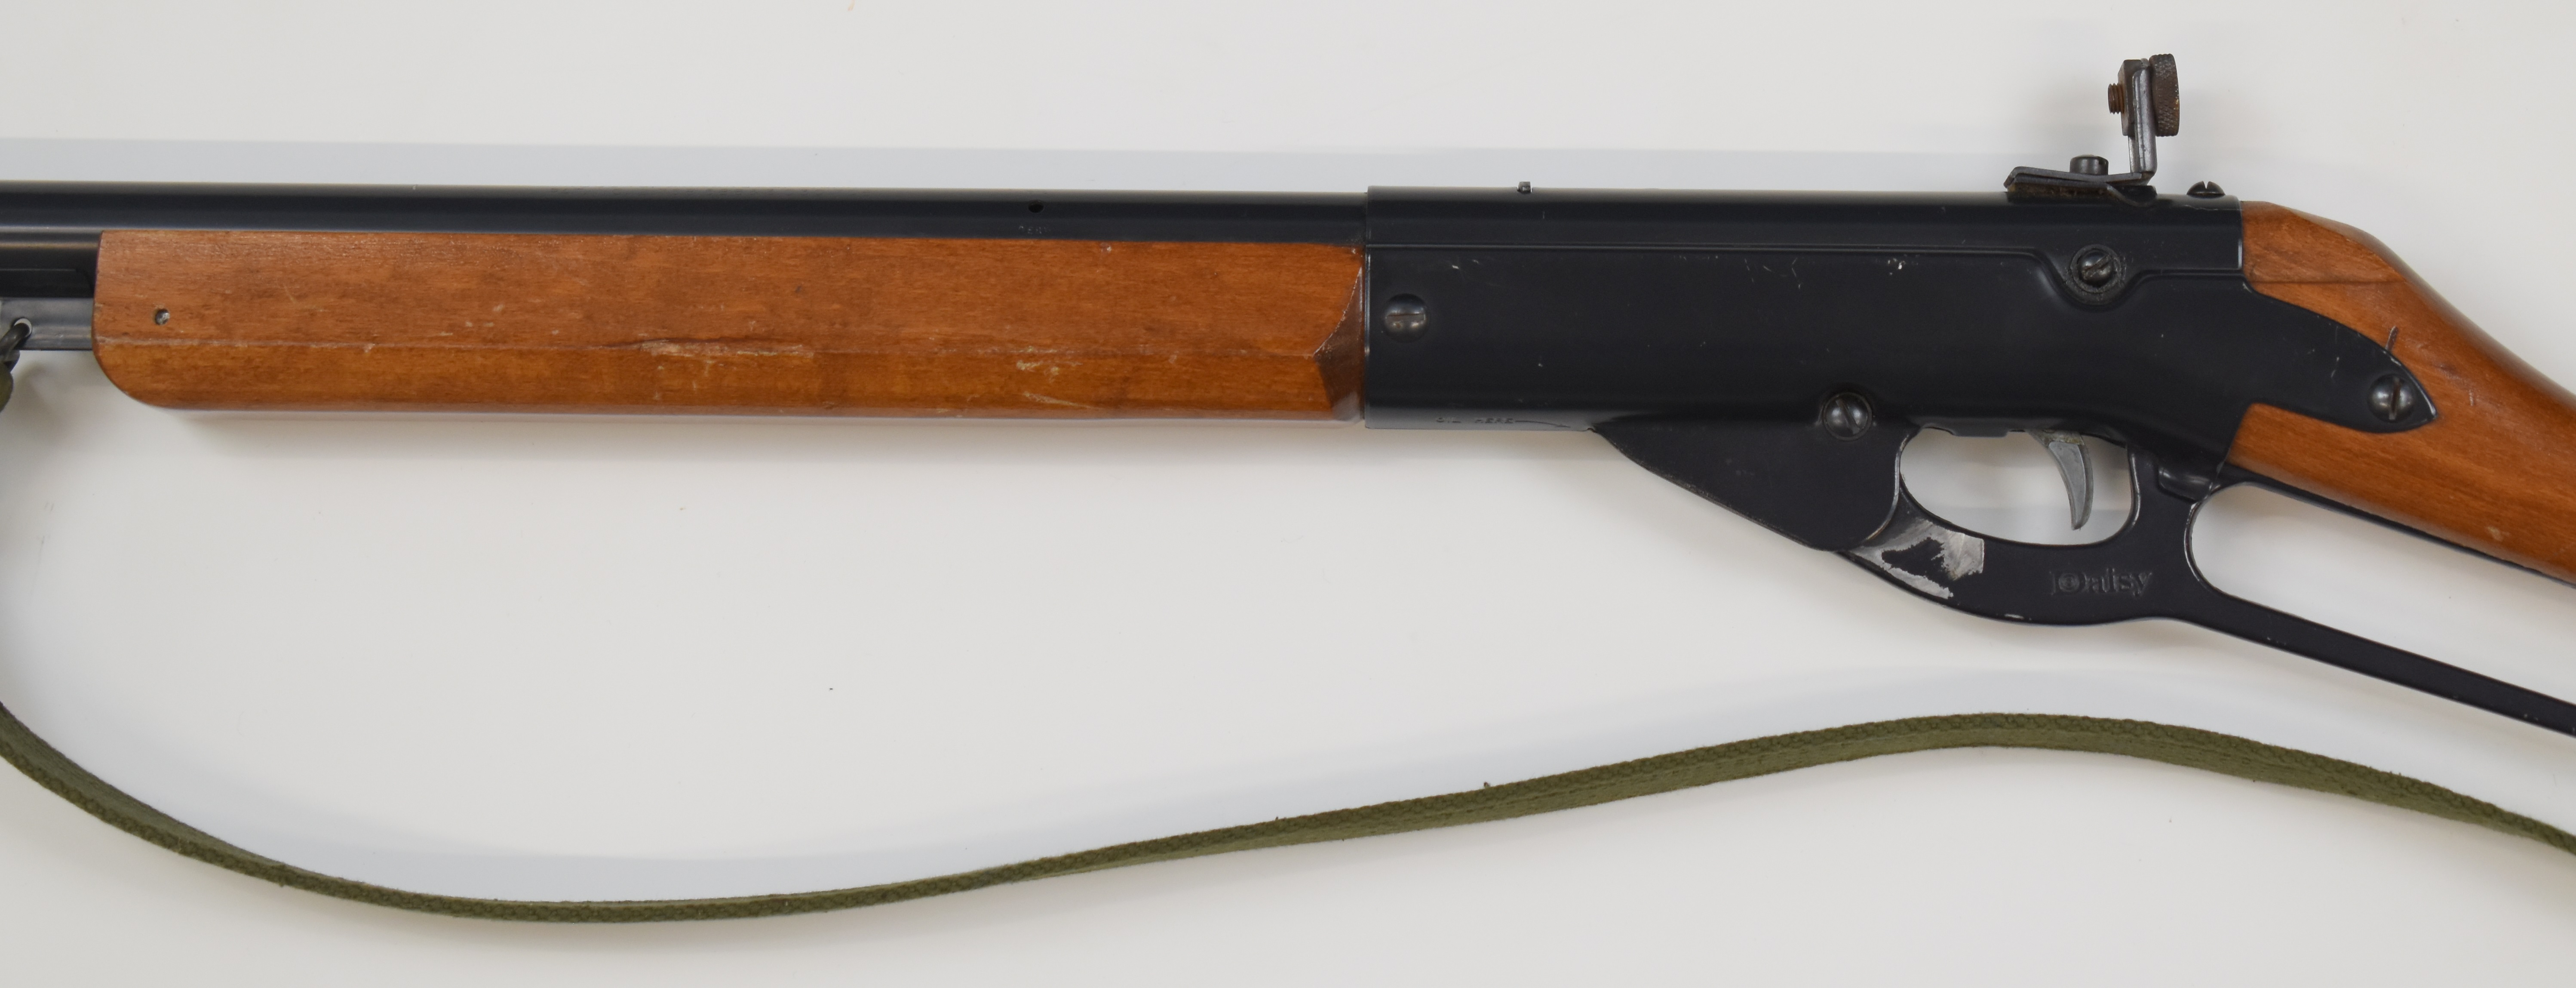 Daisy Model 99 Winchester style underlever-action air rifle with wooden grip and forend, canvas - Image 9 of 10